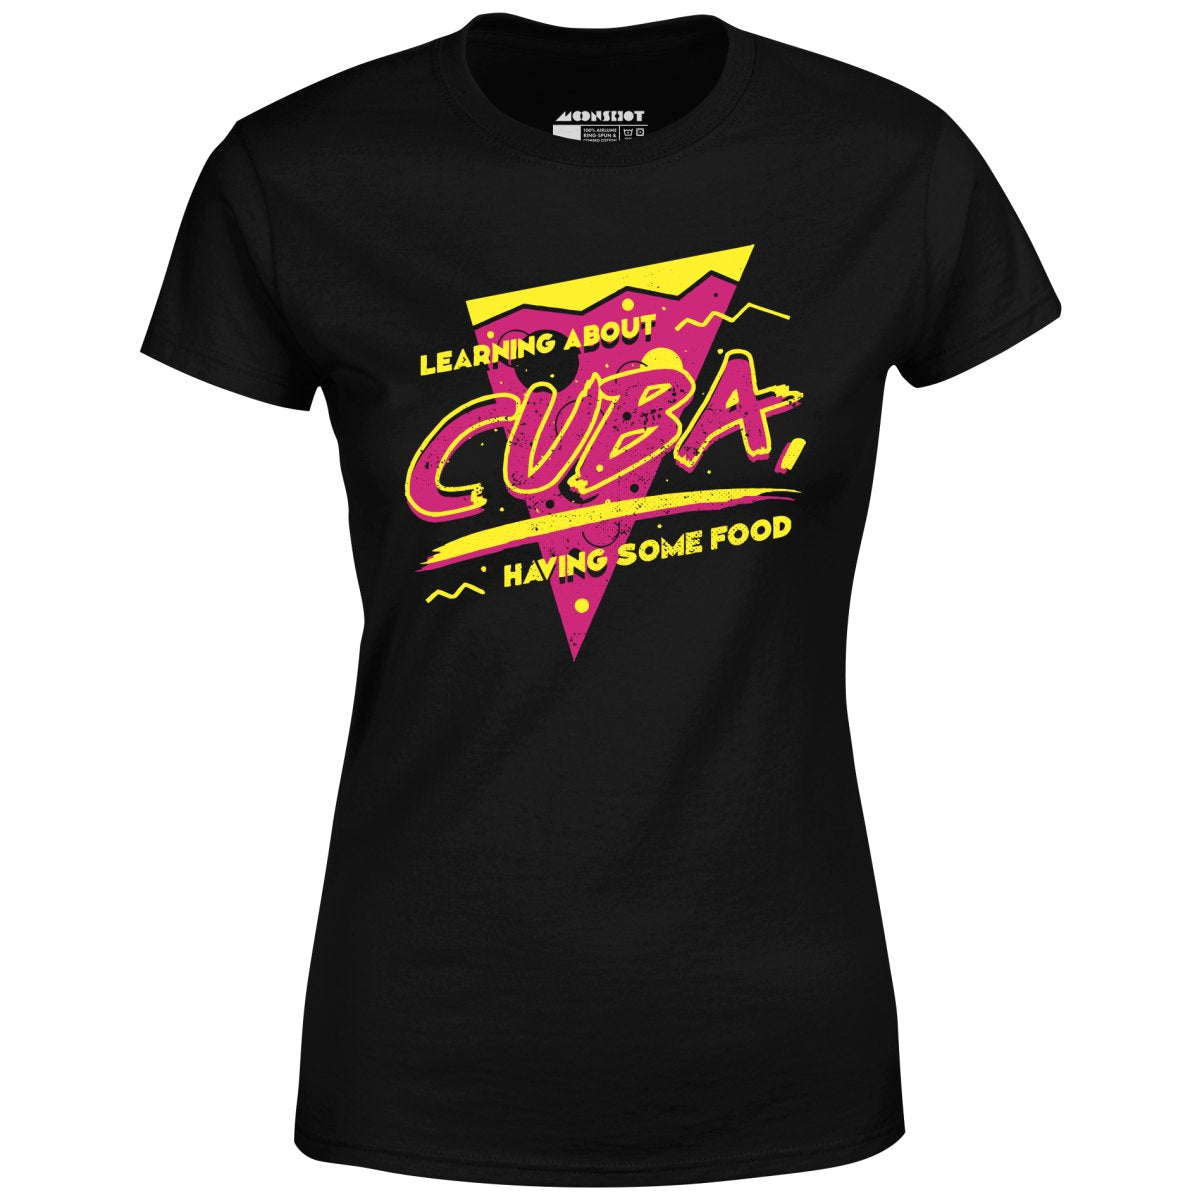 Learning About Cuba Having Some Food - Women's T-Shirt